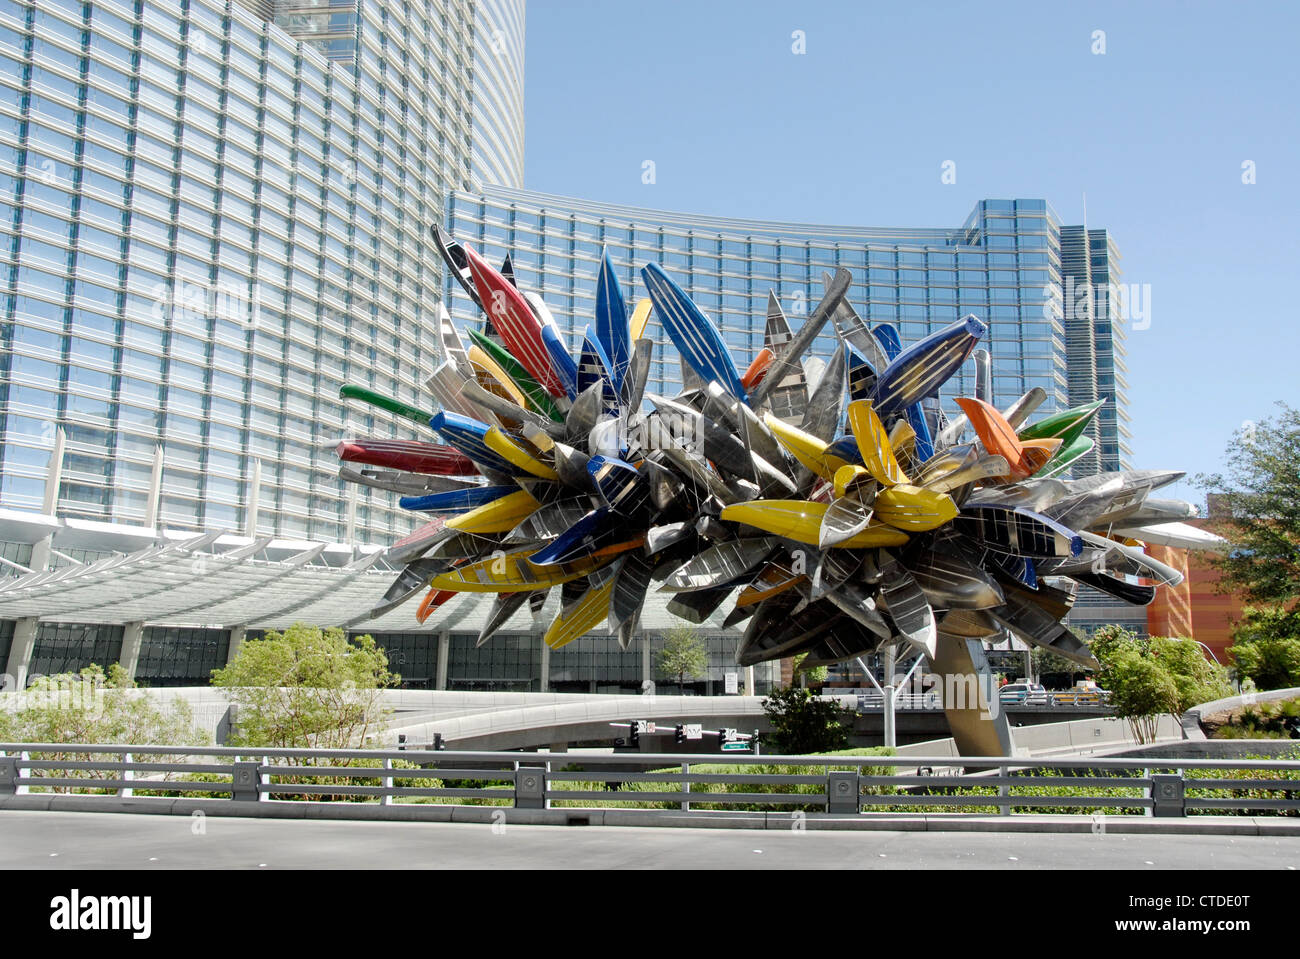 Canoe ensemble sculpture in front of the Aria Hotel in Las Vegas, Nevada, USA Stock Photo